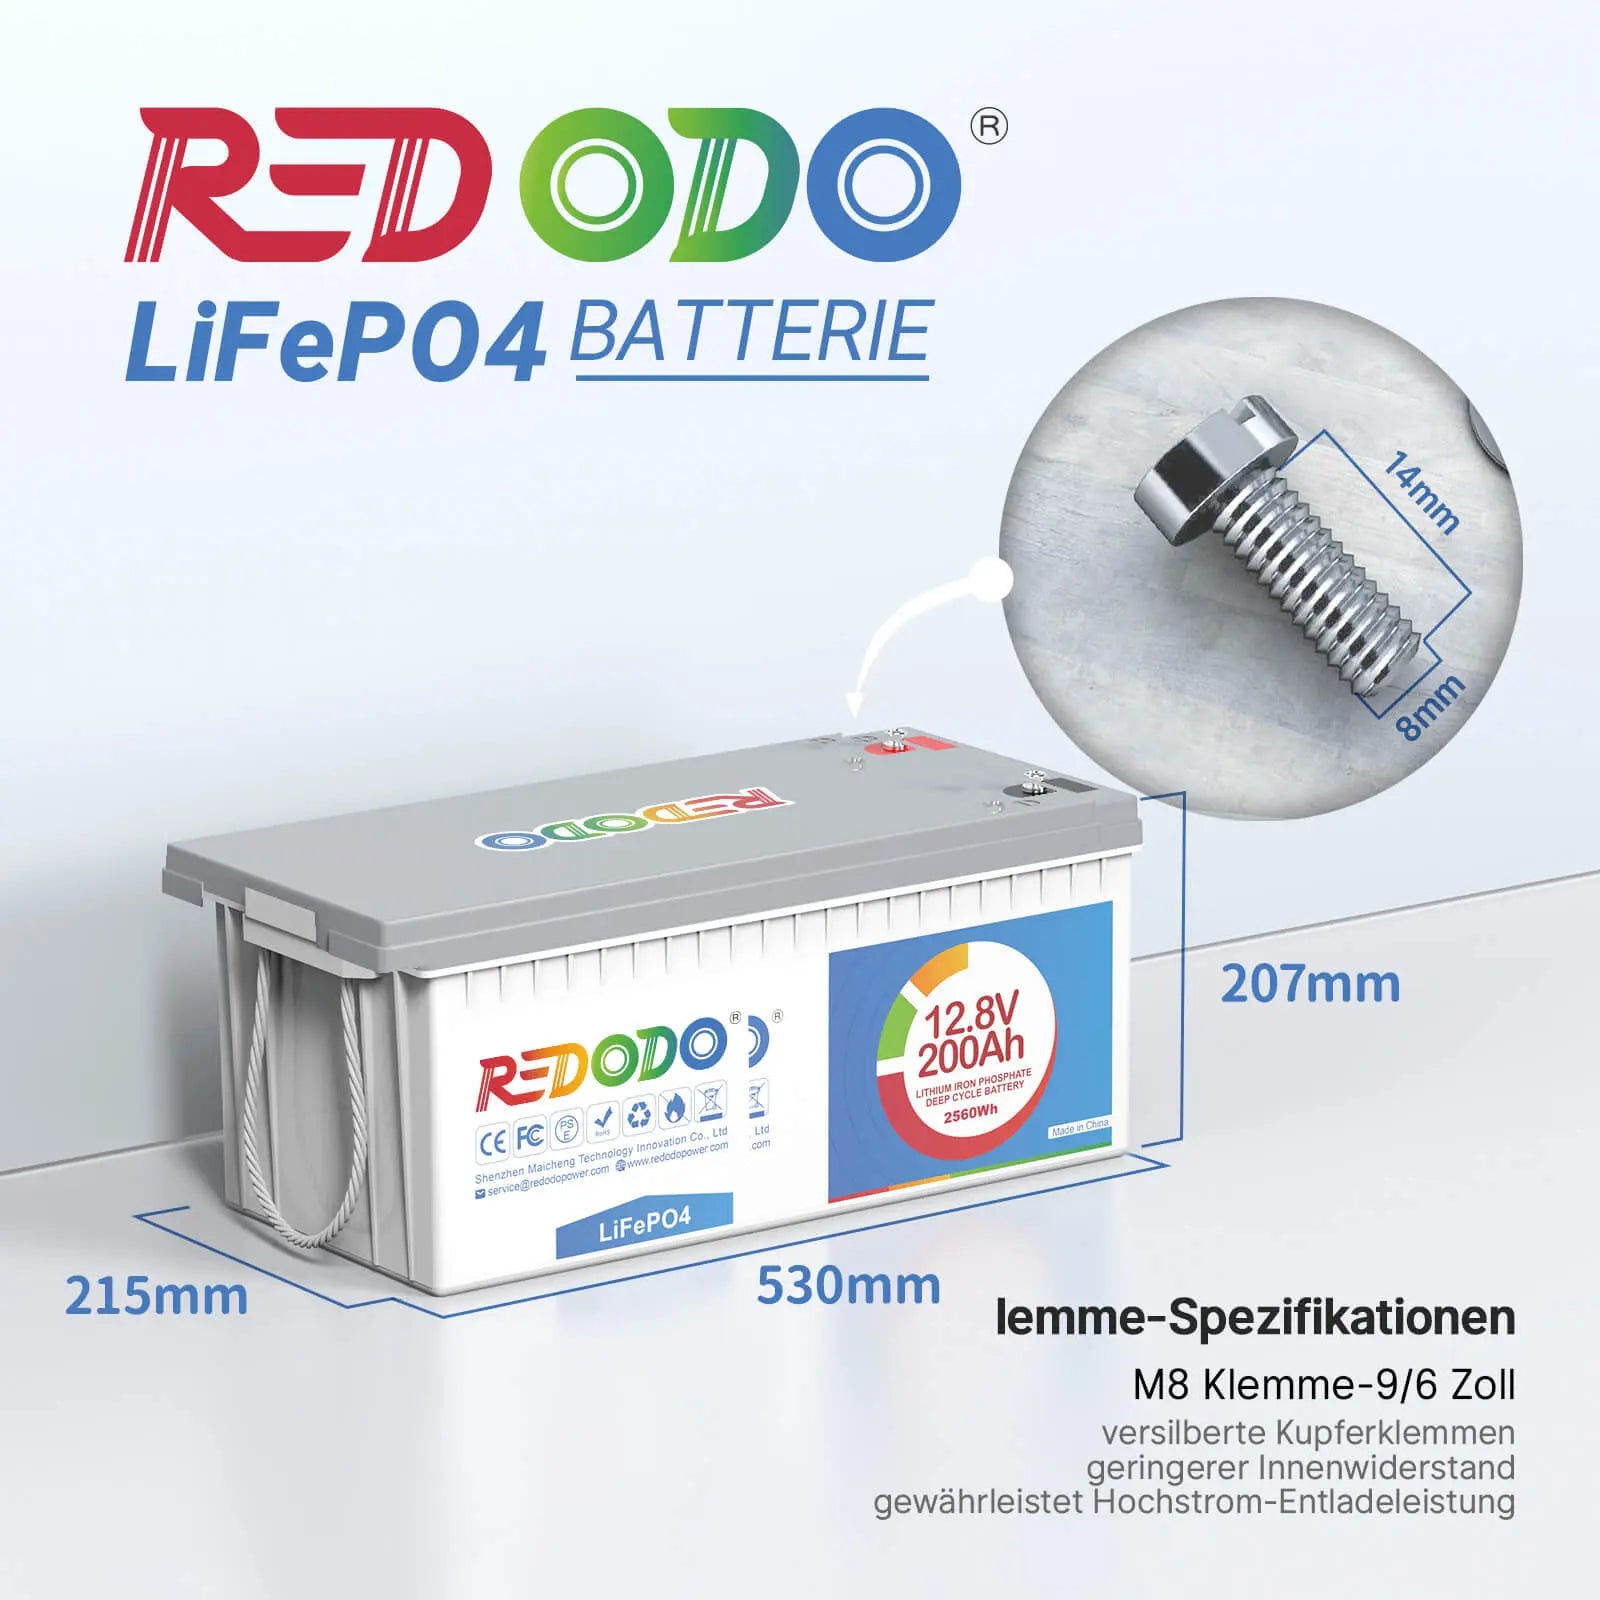 Batterie au lithium rechargeable Redodo LiFePO4 12V 200Ah | 2,56 kWh et 1,28 kW